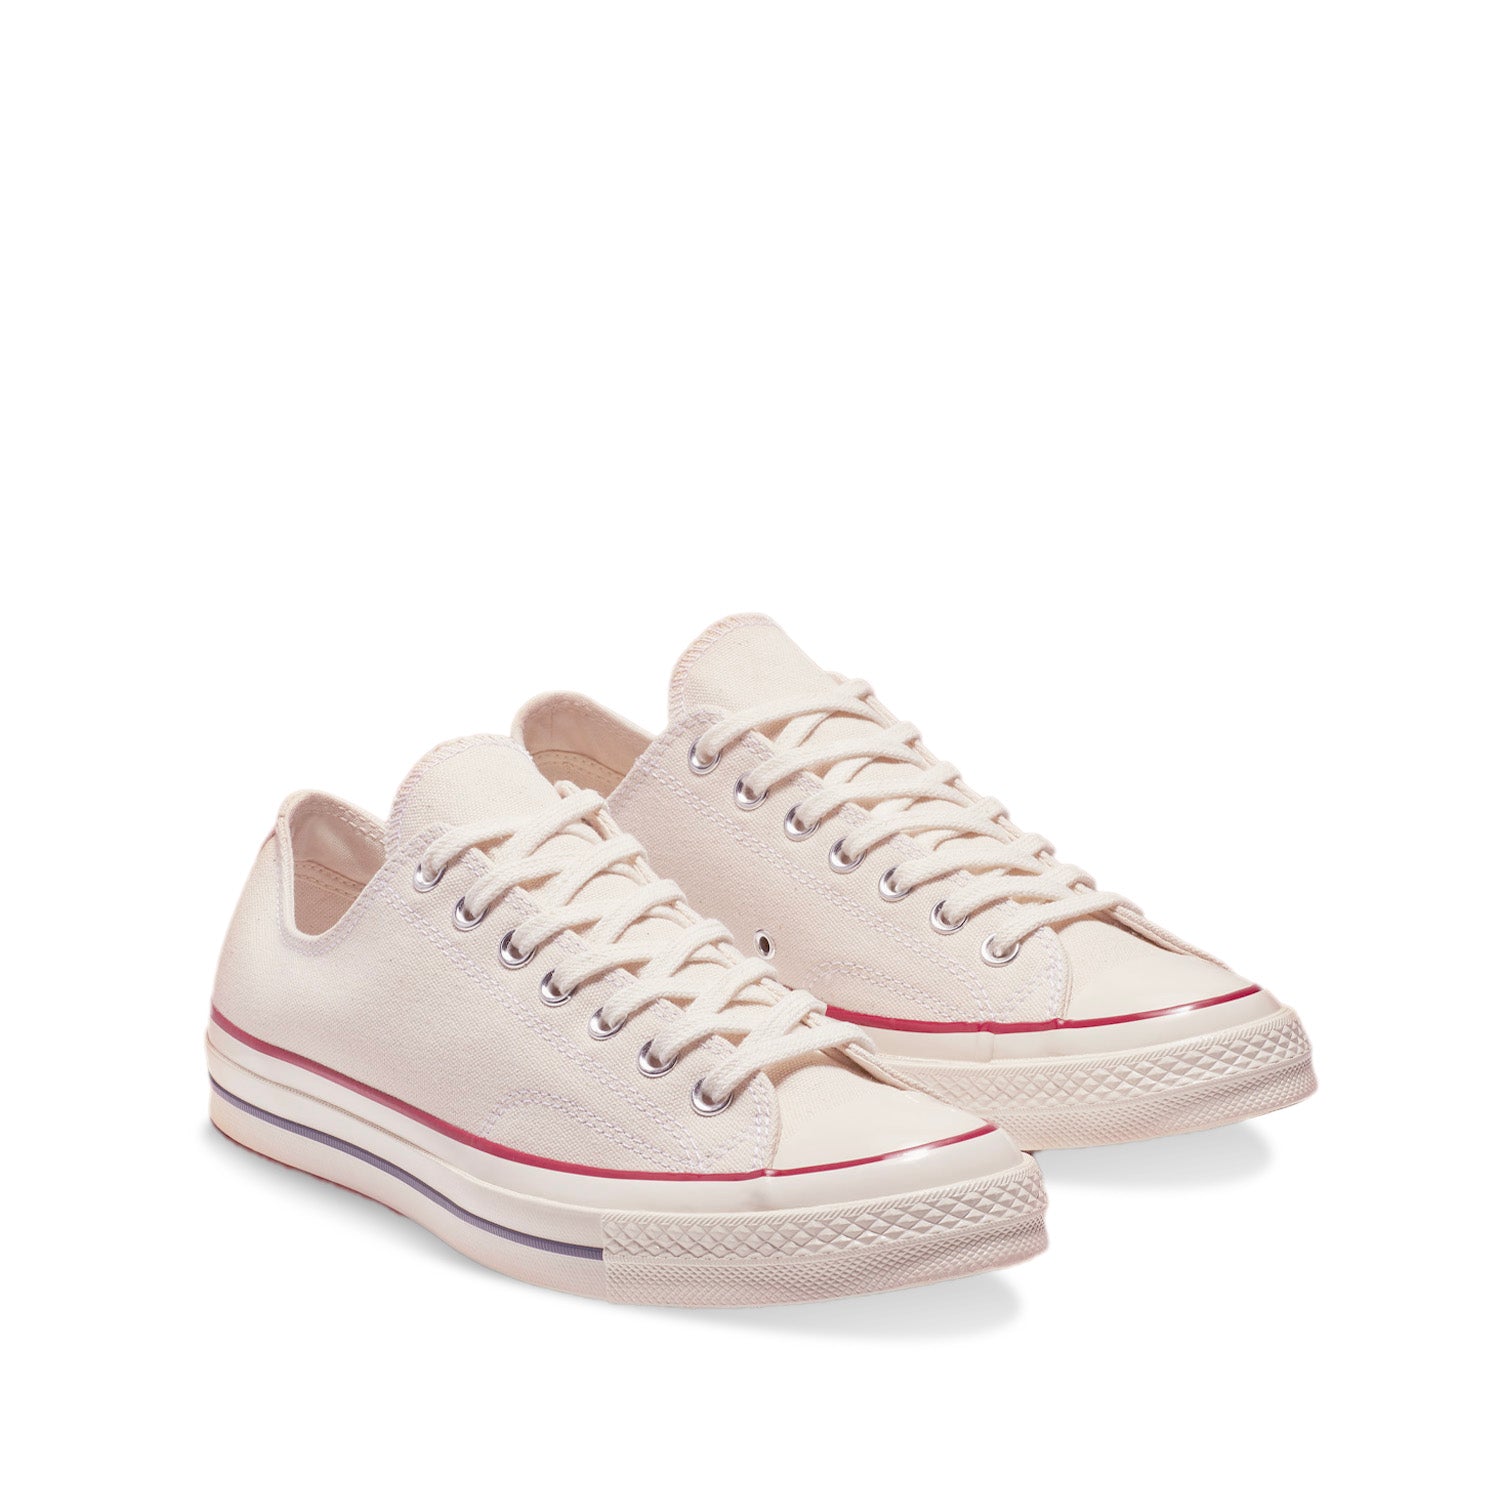 Chuck Taylor All Star '70 Parchment Lo 